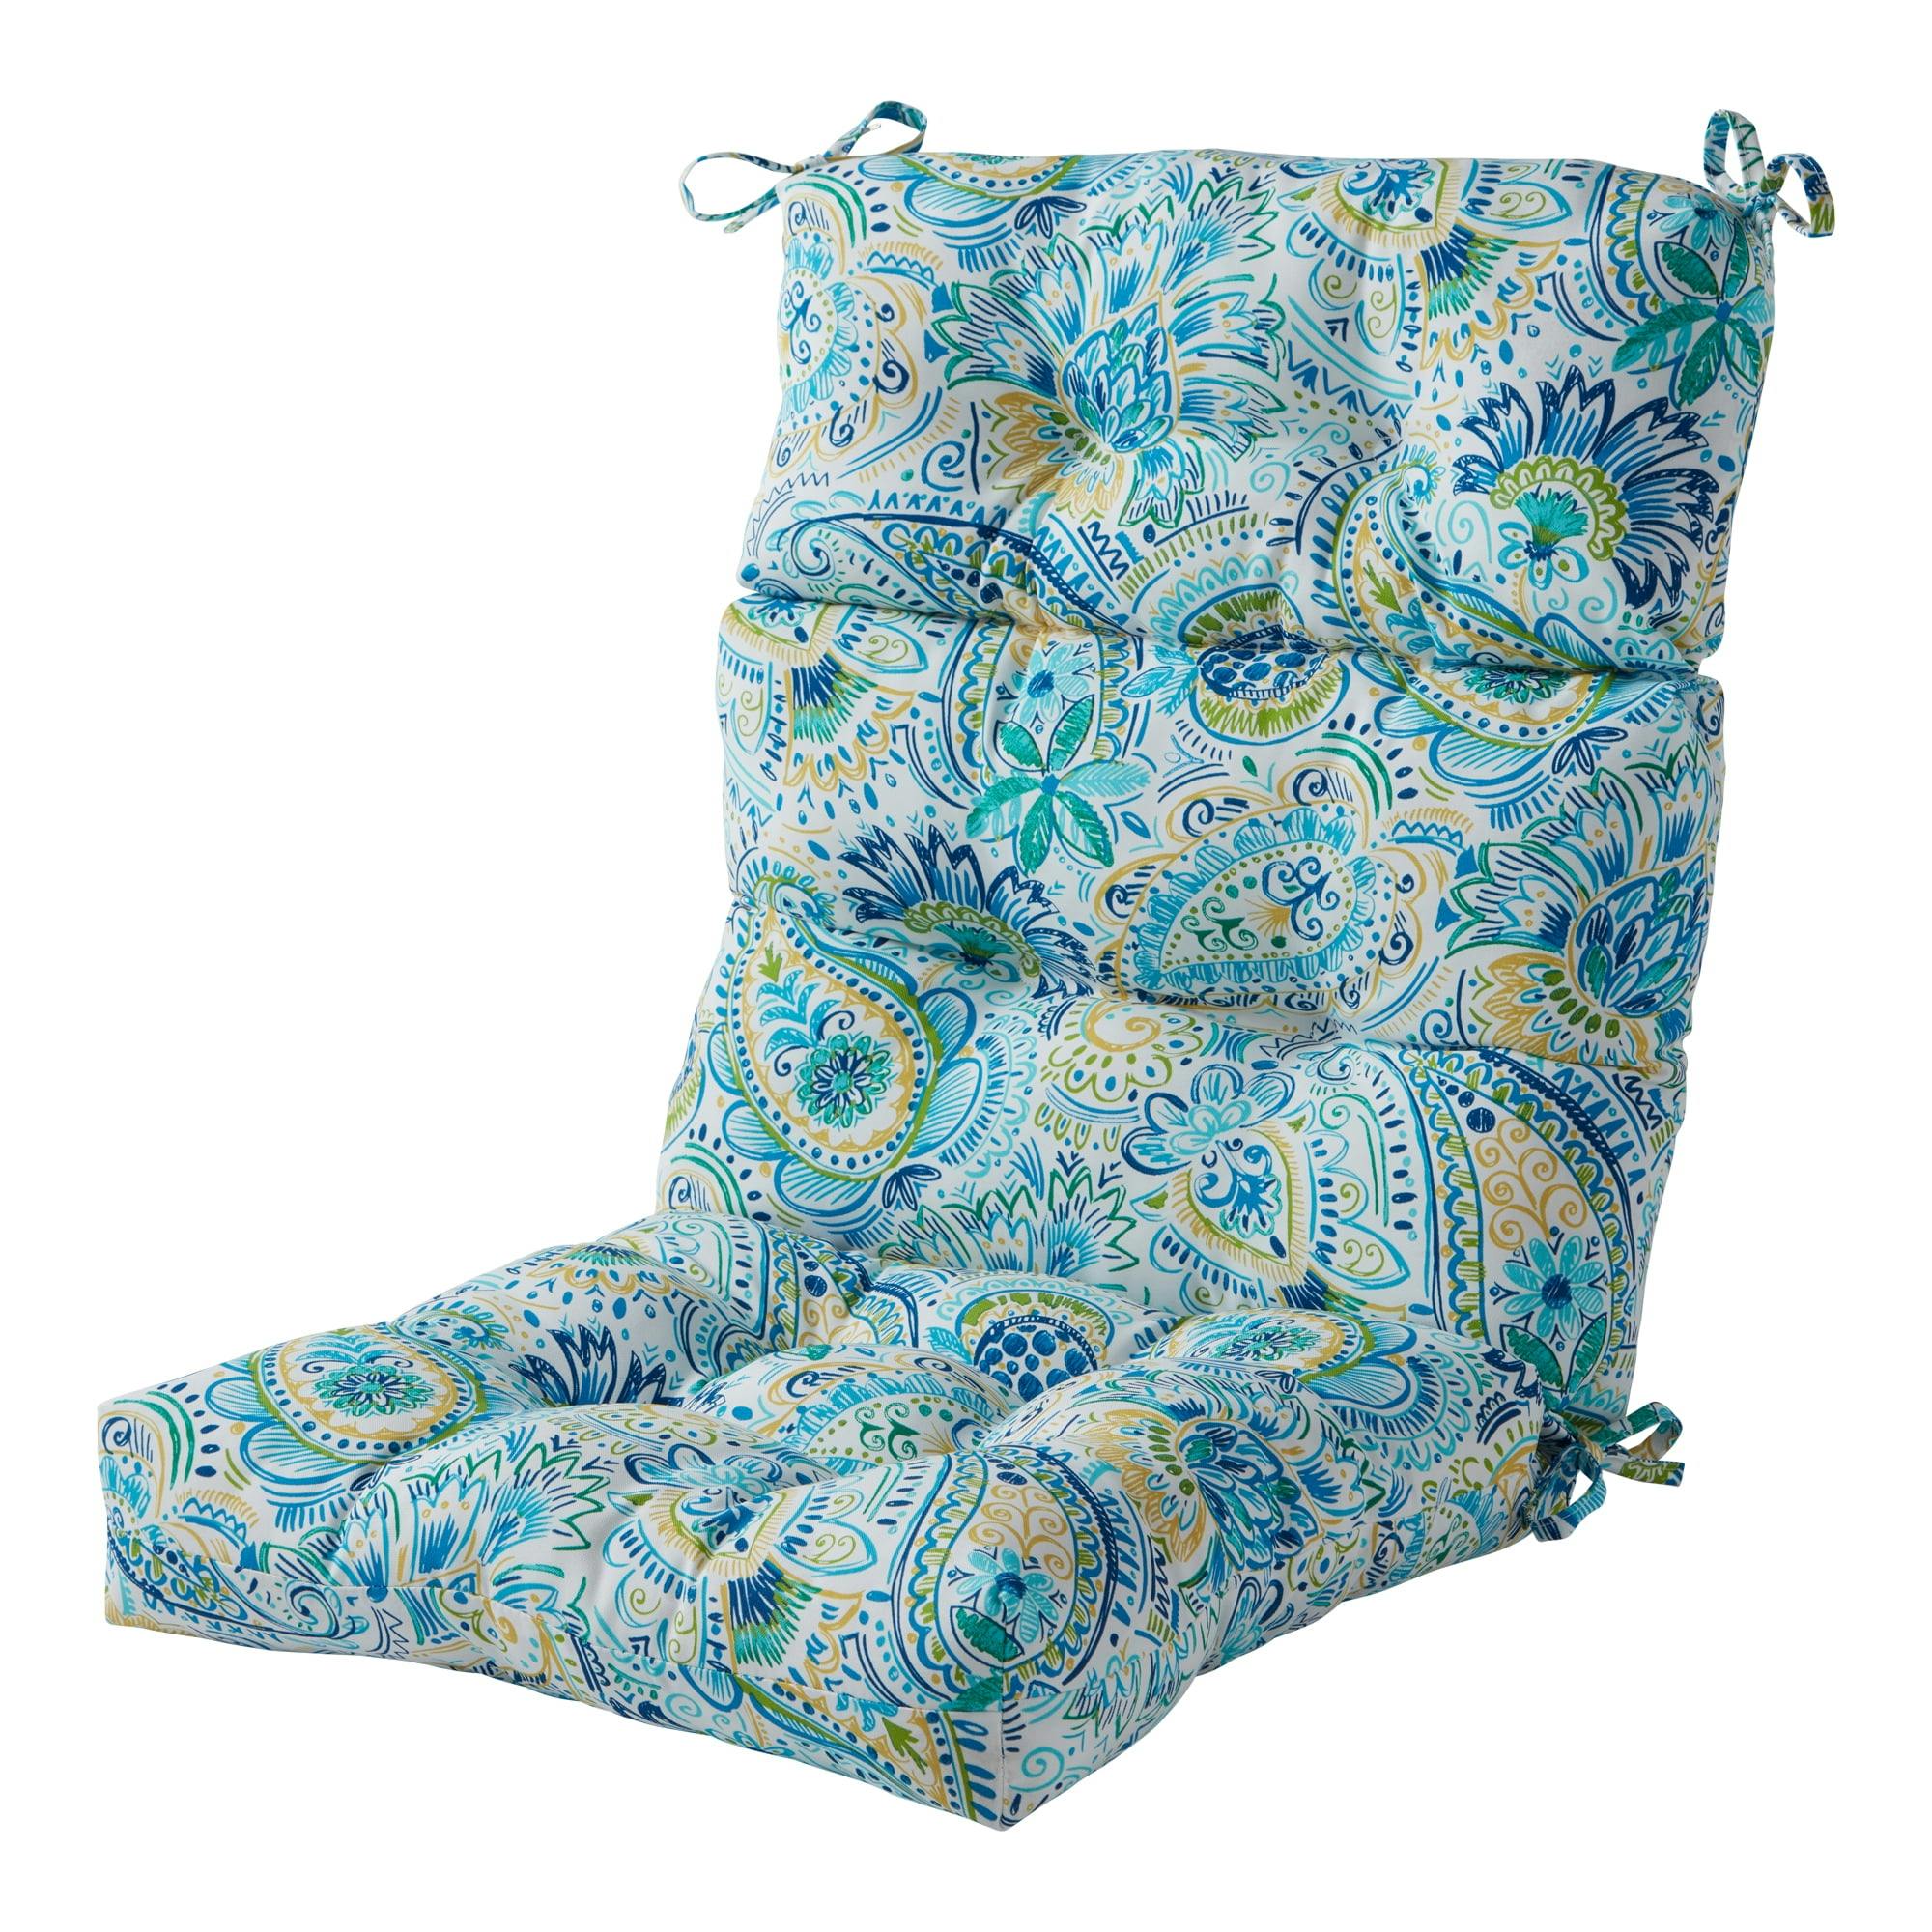 Baltic Blue 44" High Back Outdoor Chair Cushion with Recycled Fill